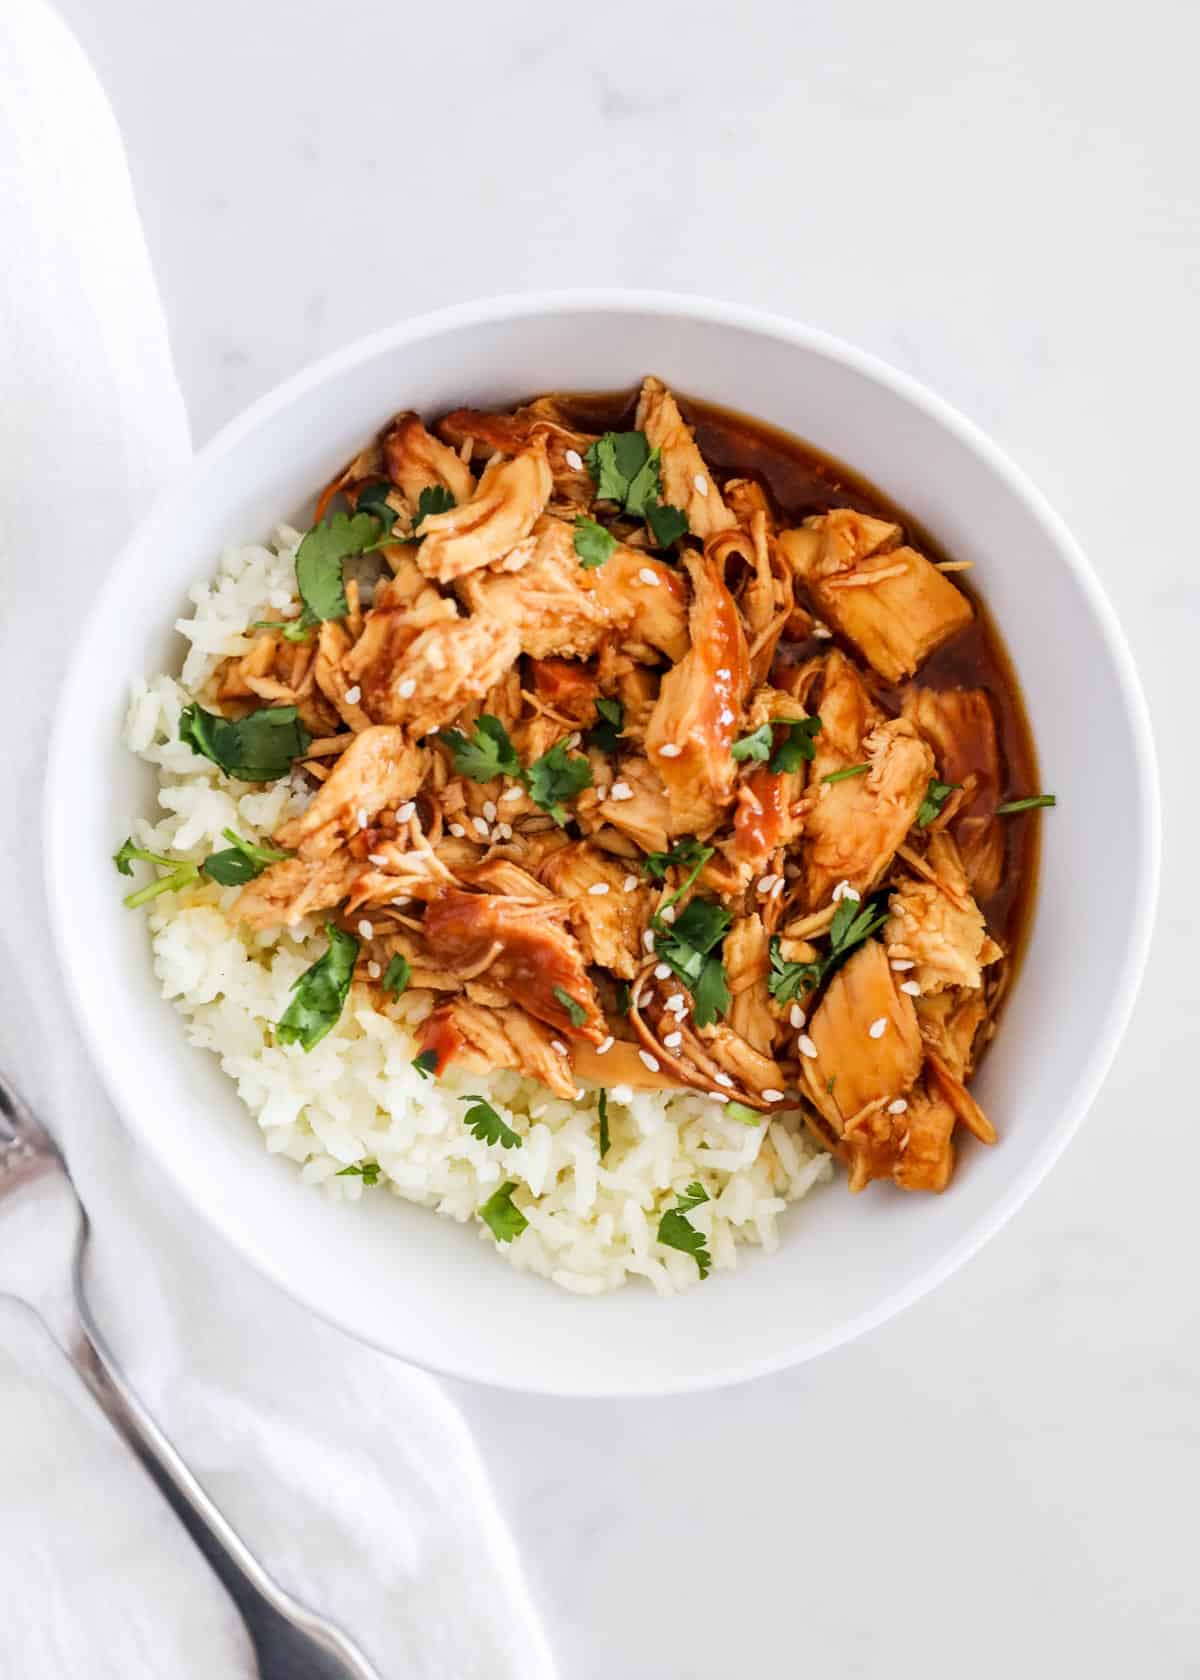 Teriyaki chicken and rice in bowl.